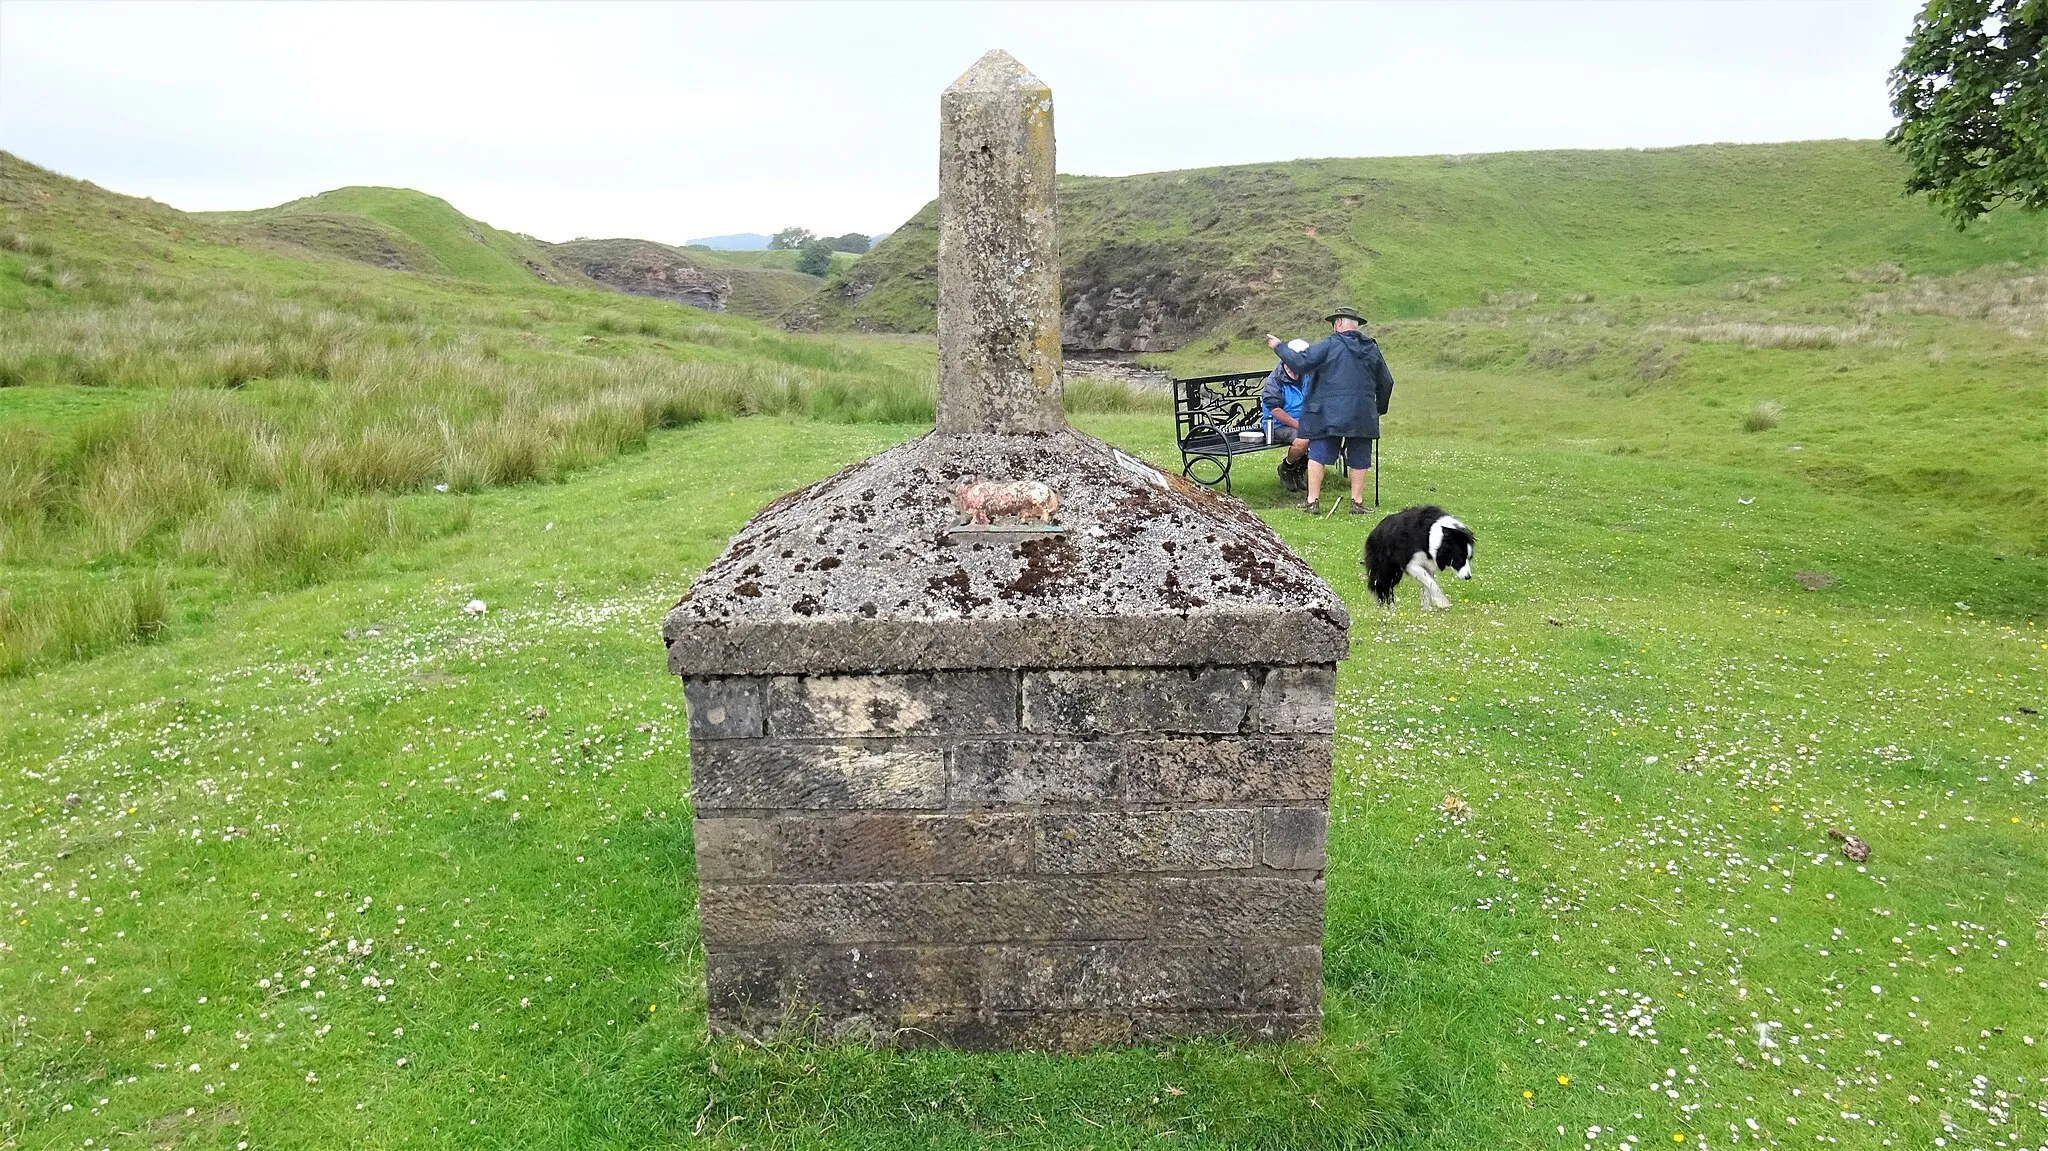 Photo showing: Isobel 'Tibbie' Pagans Memorial, Garpel Water, Muirkirk, East Ayrshire, Scotland. She lived in a converted brick store here for many years. She was a published poet and a local character.